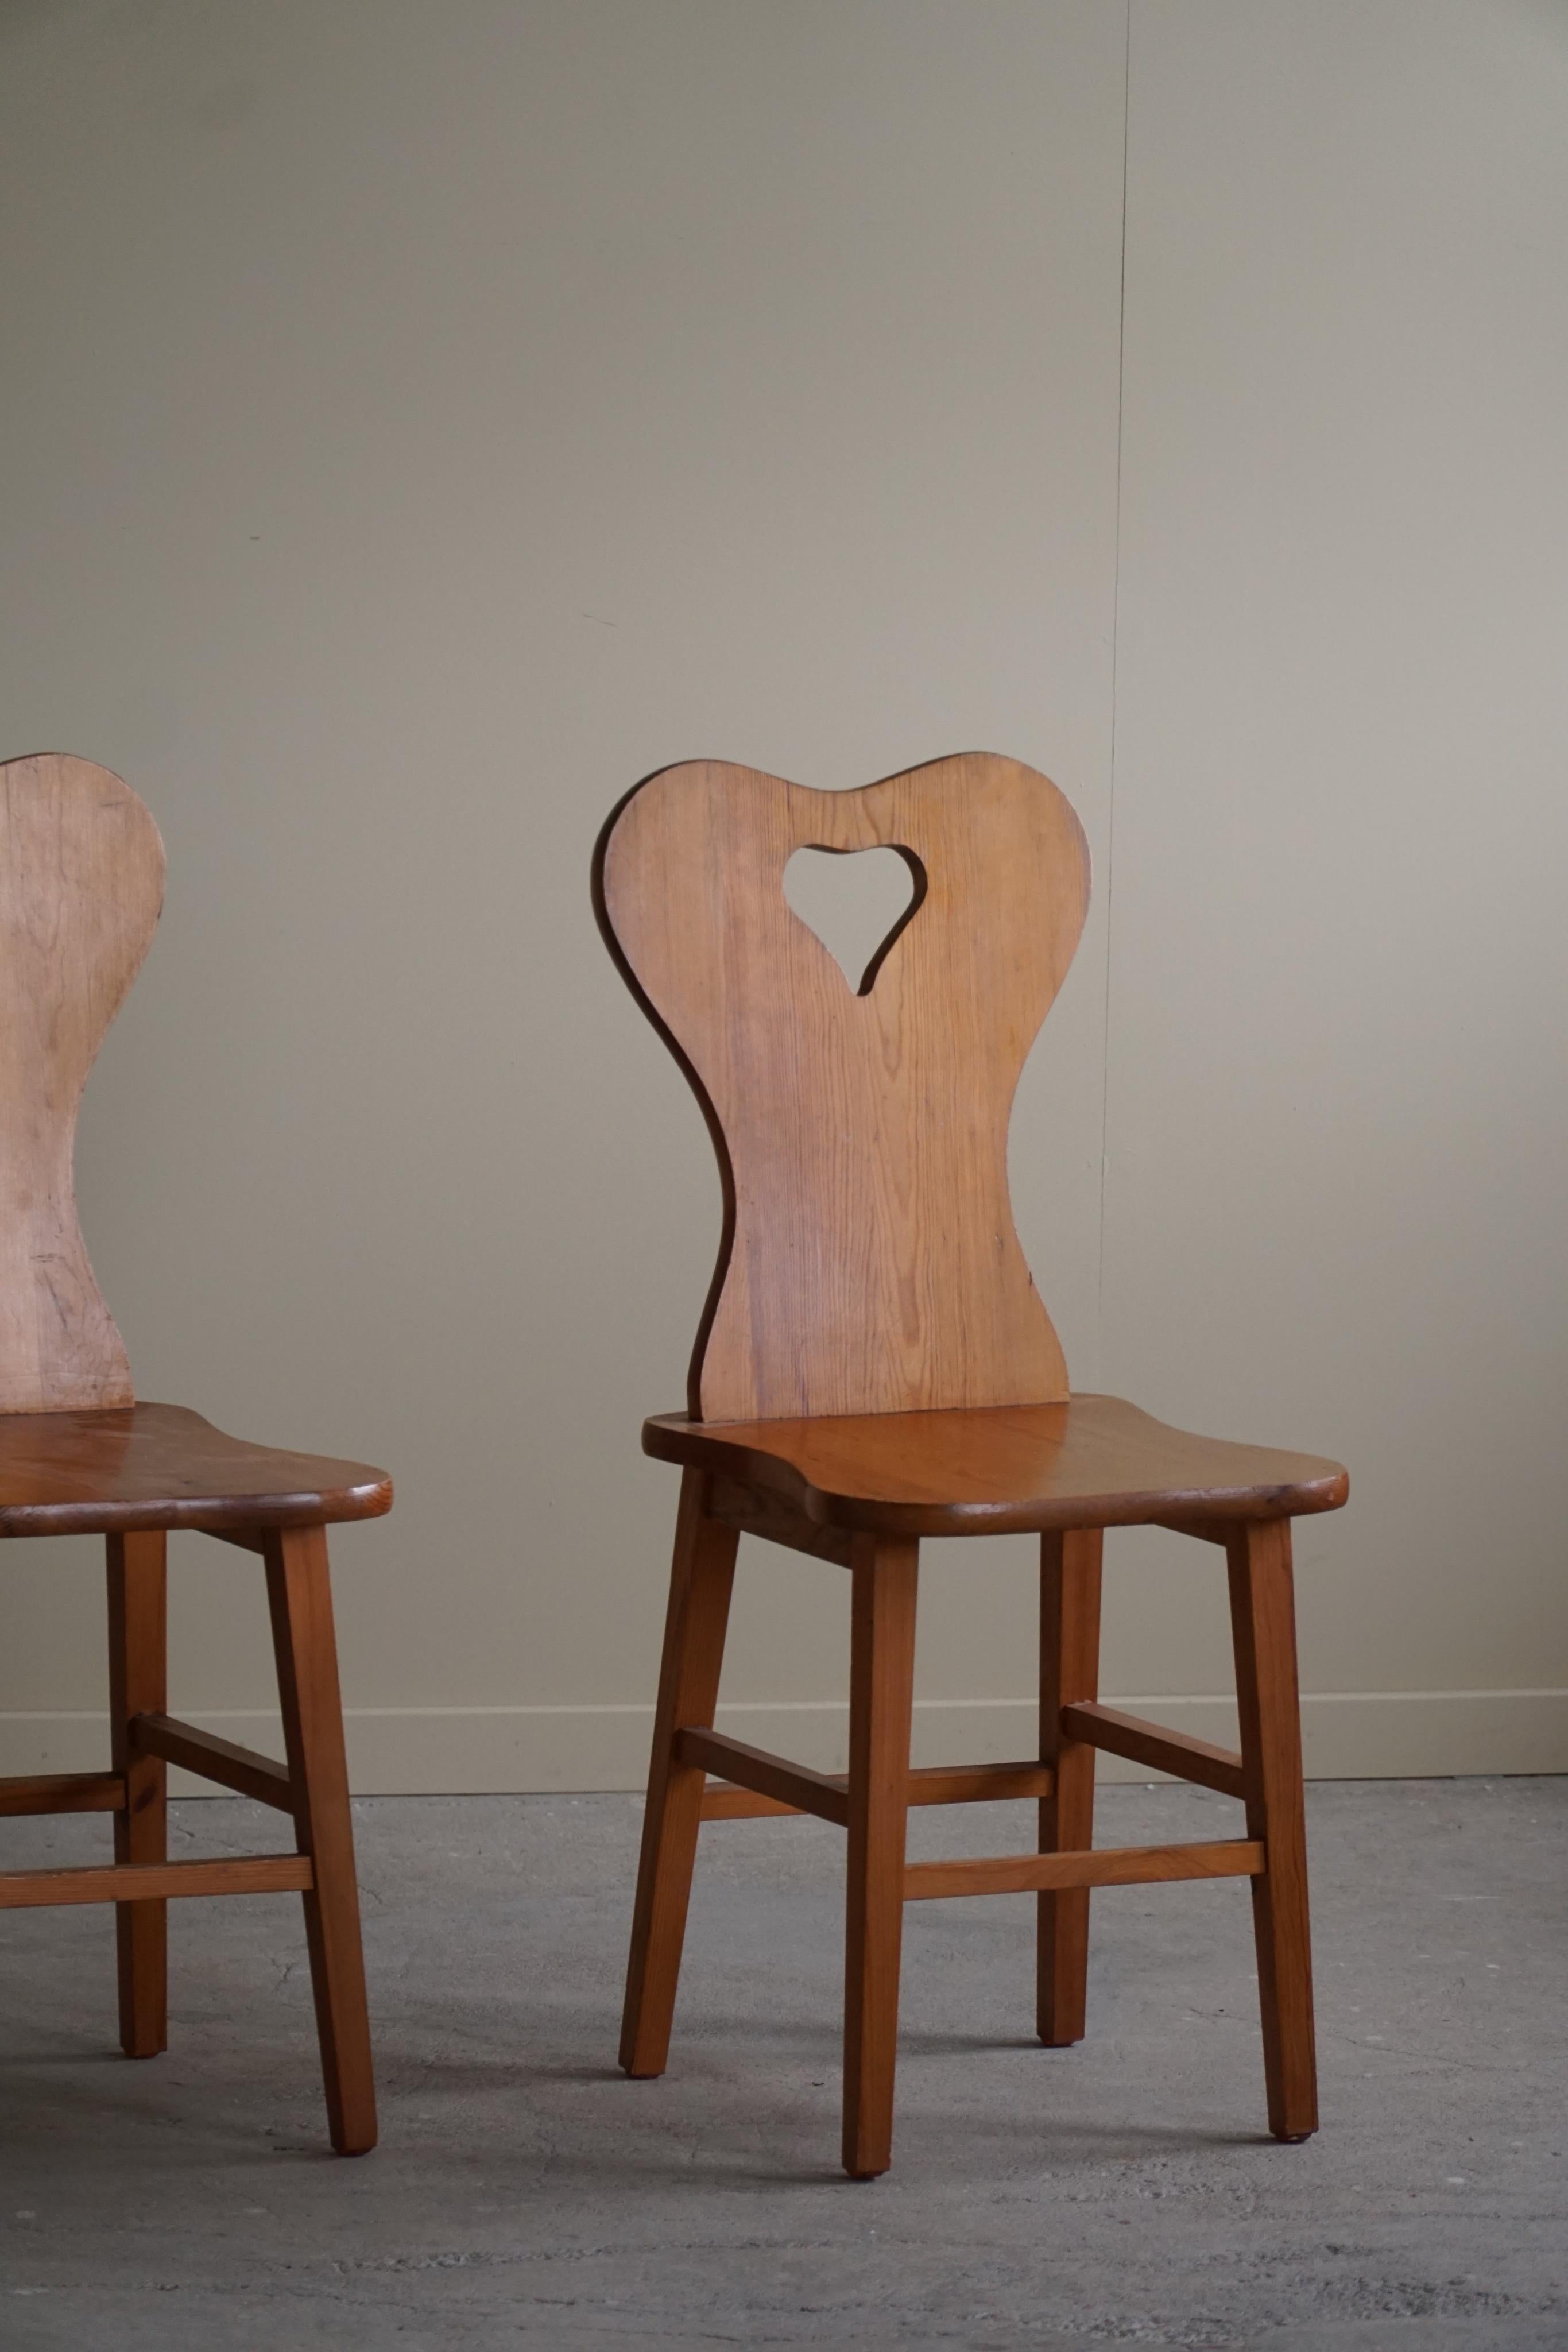 Set of 4 Chairs in Pine, by a Swedish Cabinetmaker, Scandinavian Modern, 1960s For Sale 4